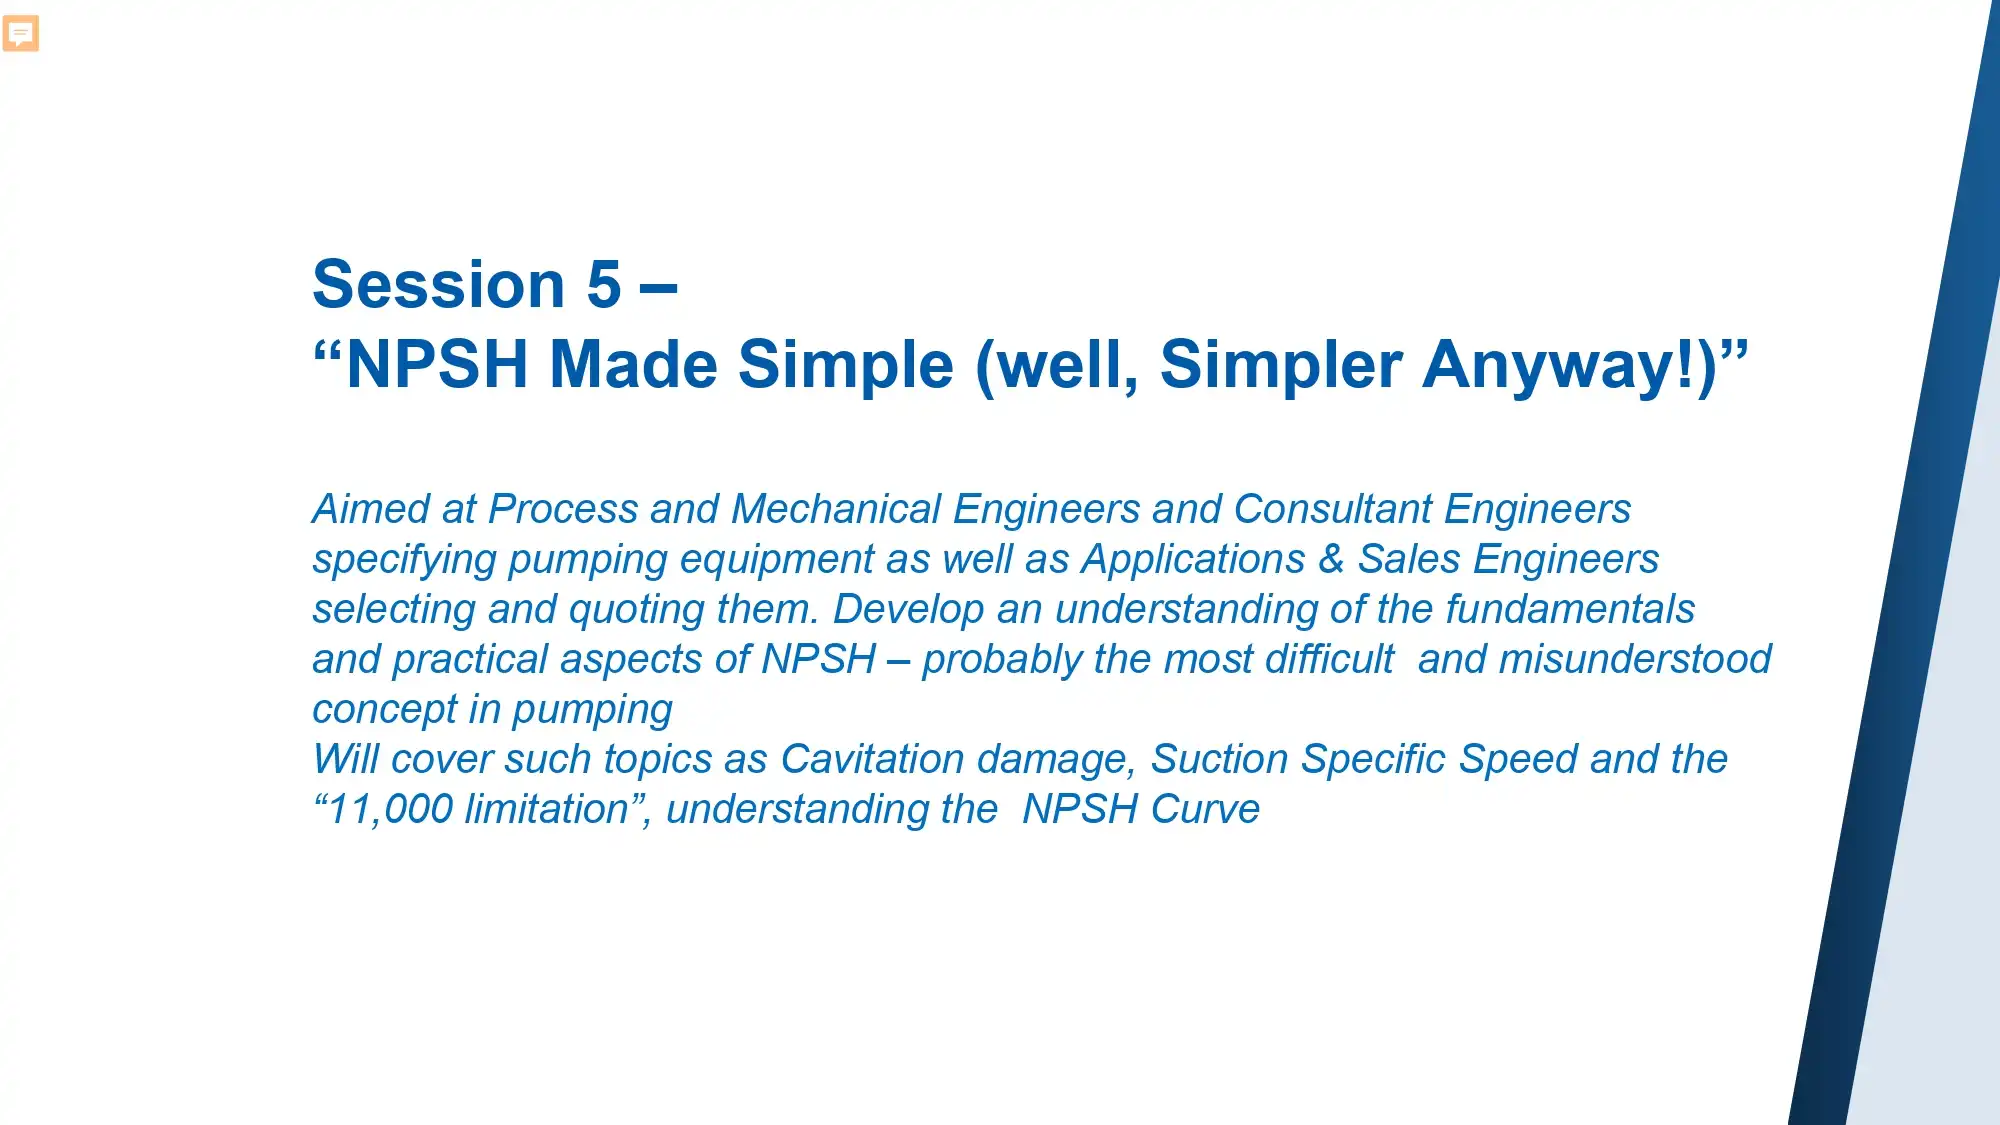 Session 5 NPSH Made Simple (well, Simpler Anyway!)